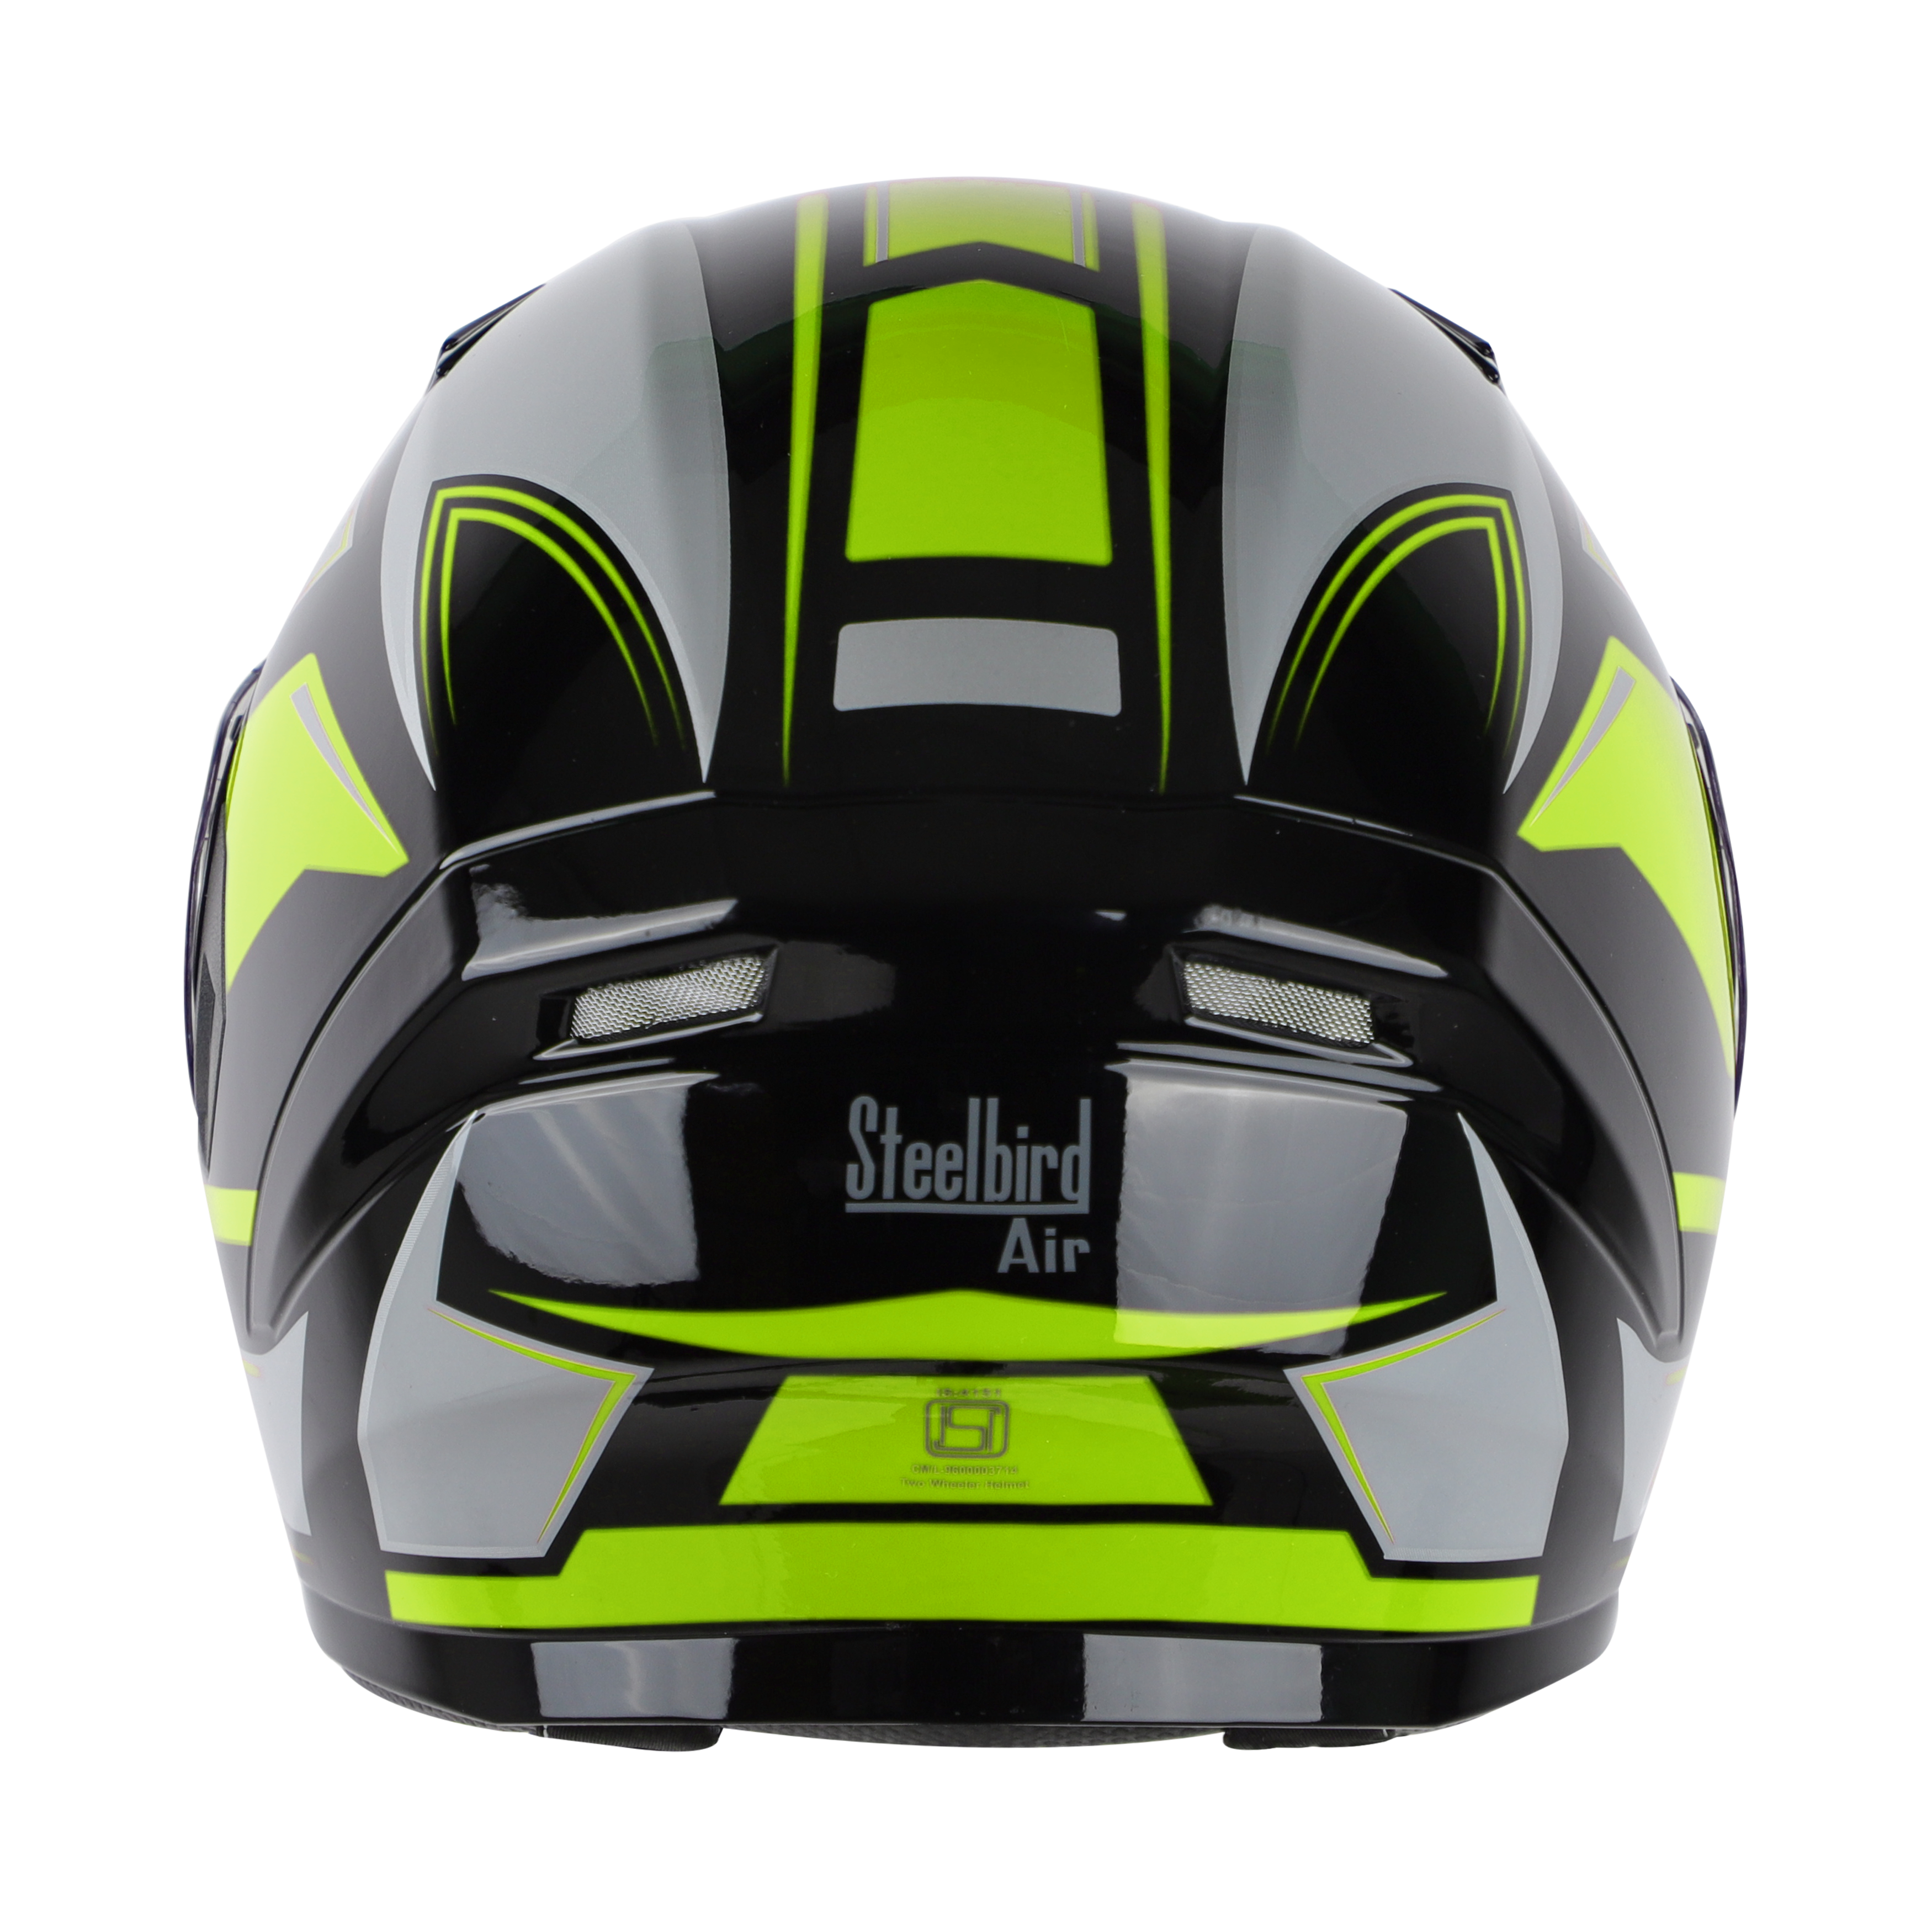 SBA-21 AIR CARBON GLOSSY BLACK WITH NEON (WITH CHROME SILVER  INNER SUNSHIELD)